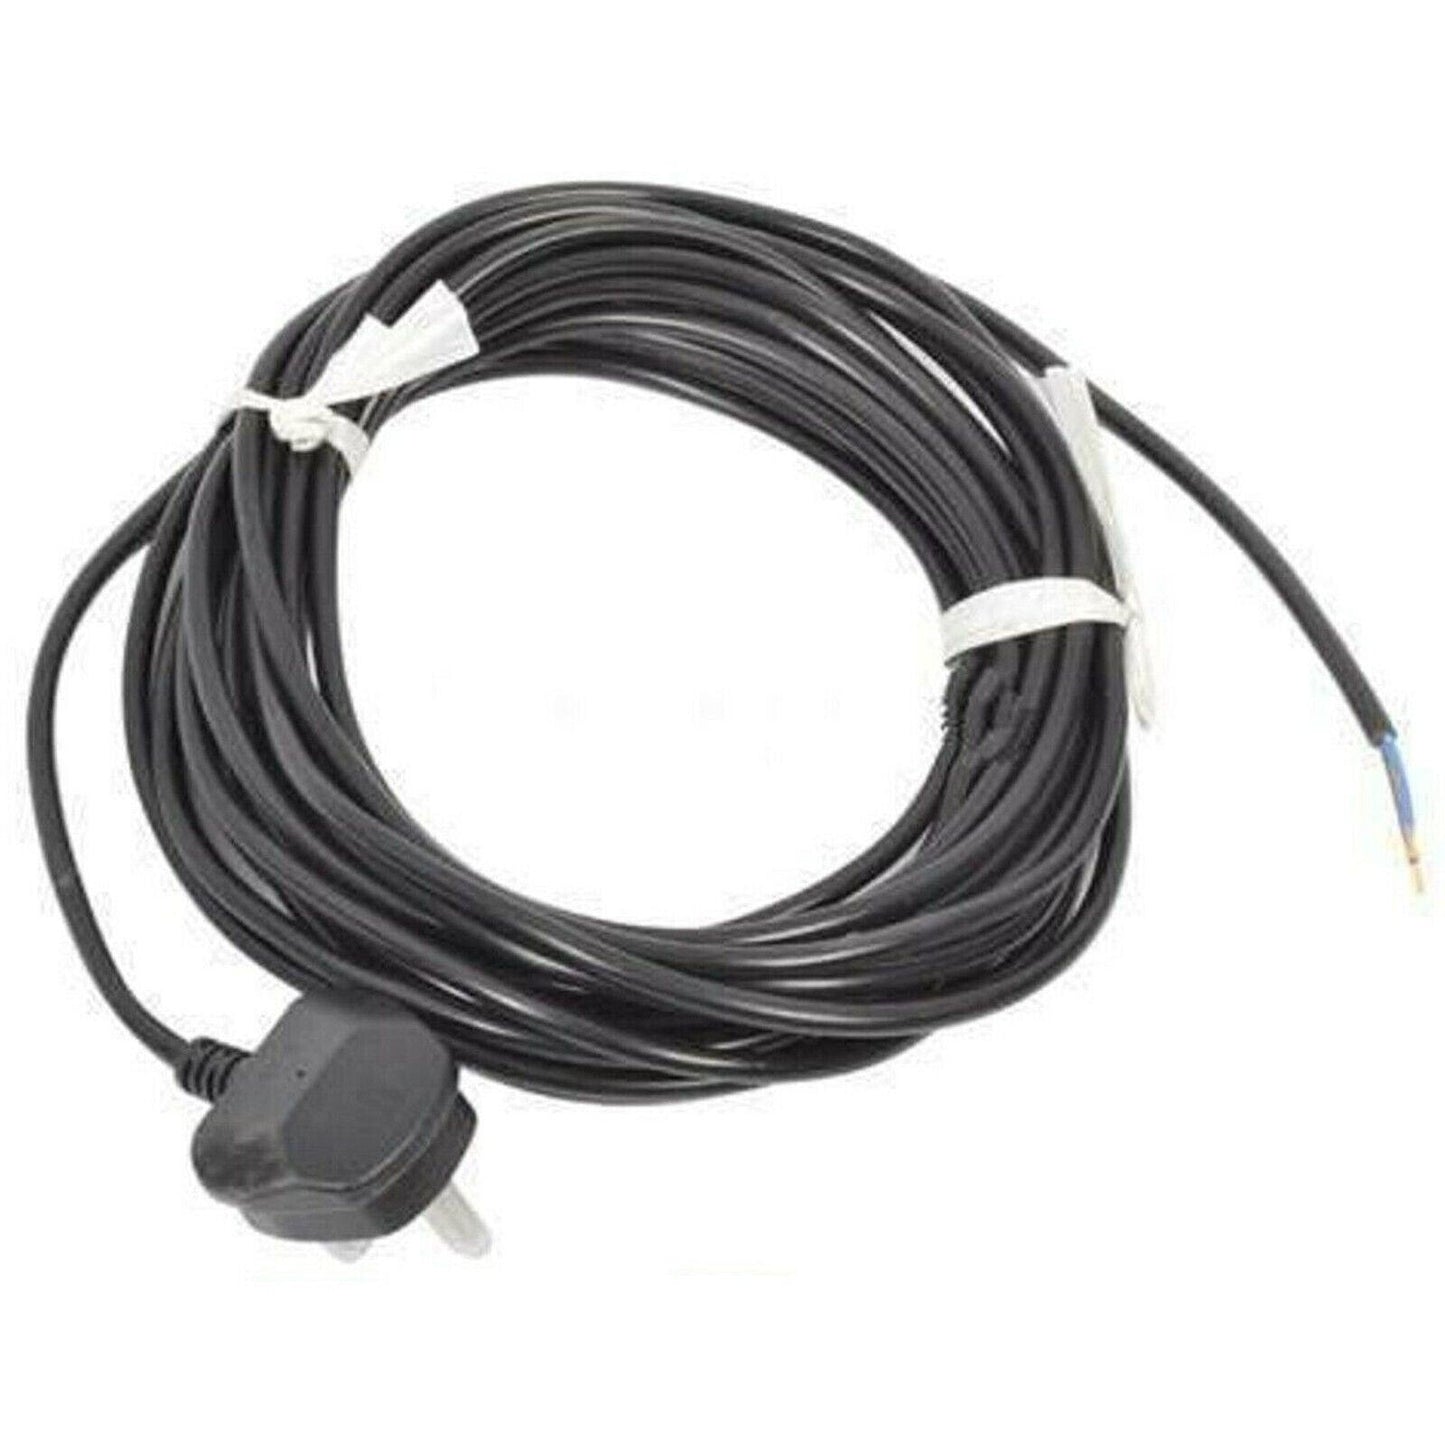 10m Power Cable for Shark Vacuum Cleaner - Vacuum Cleaner Clinic 